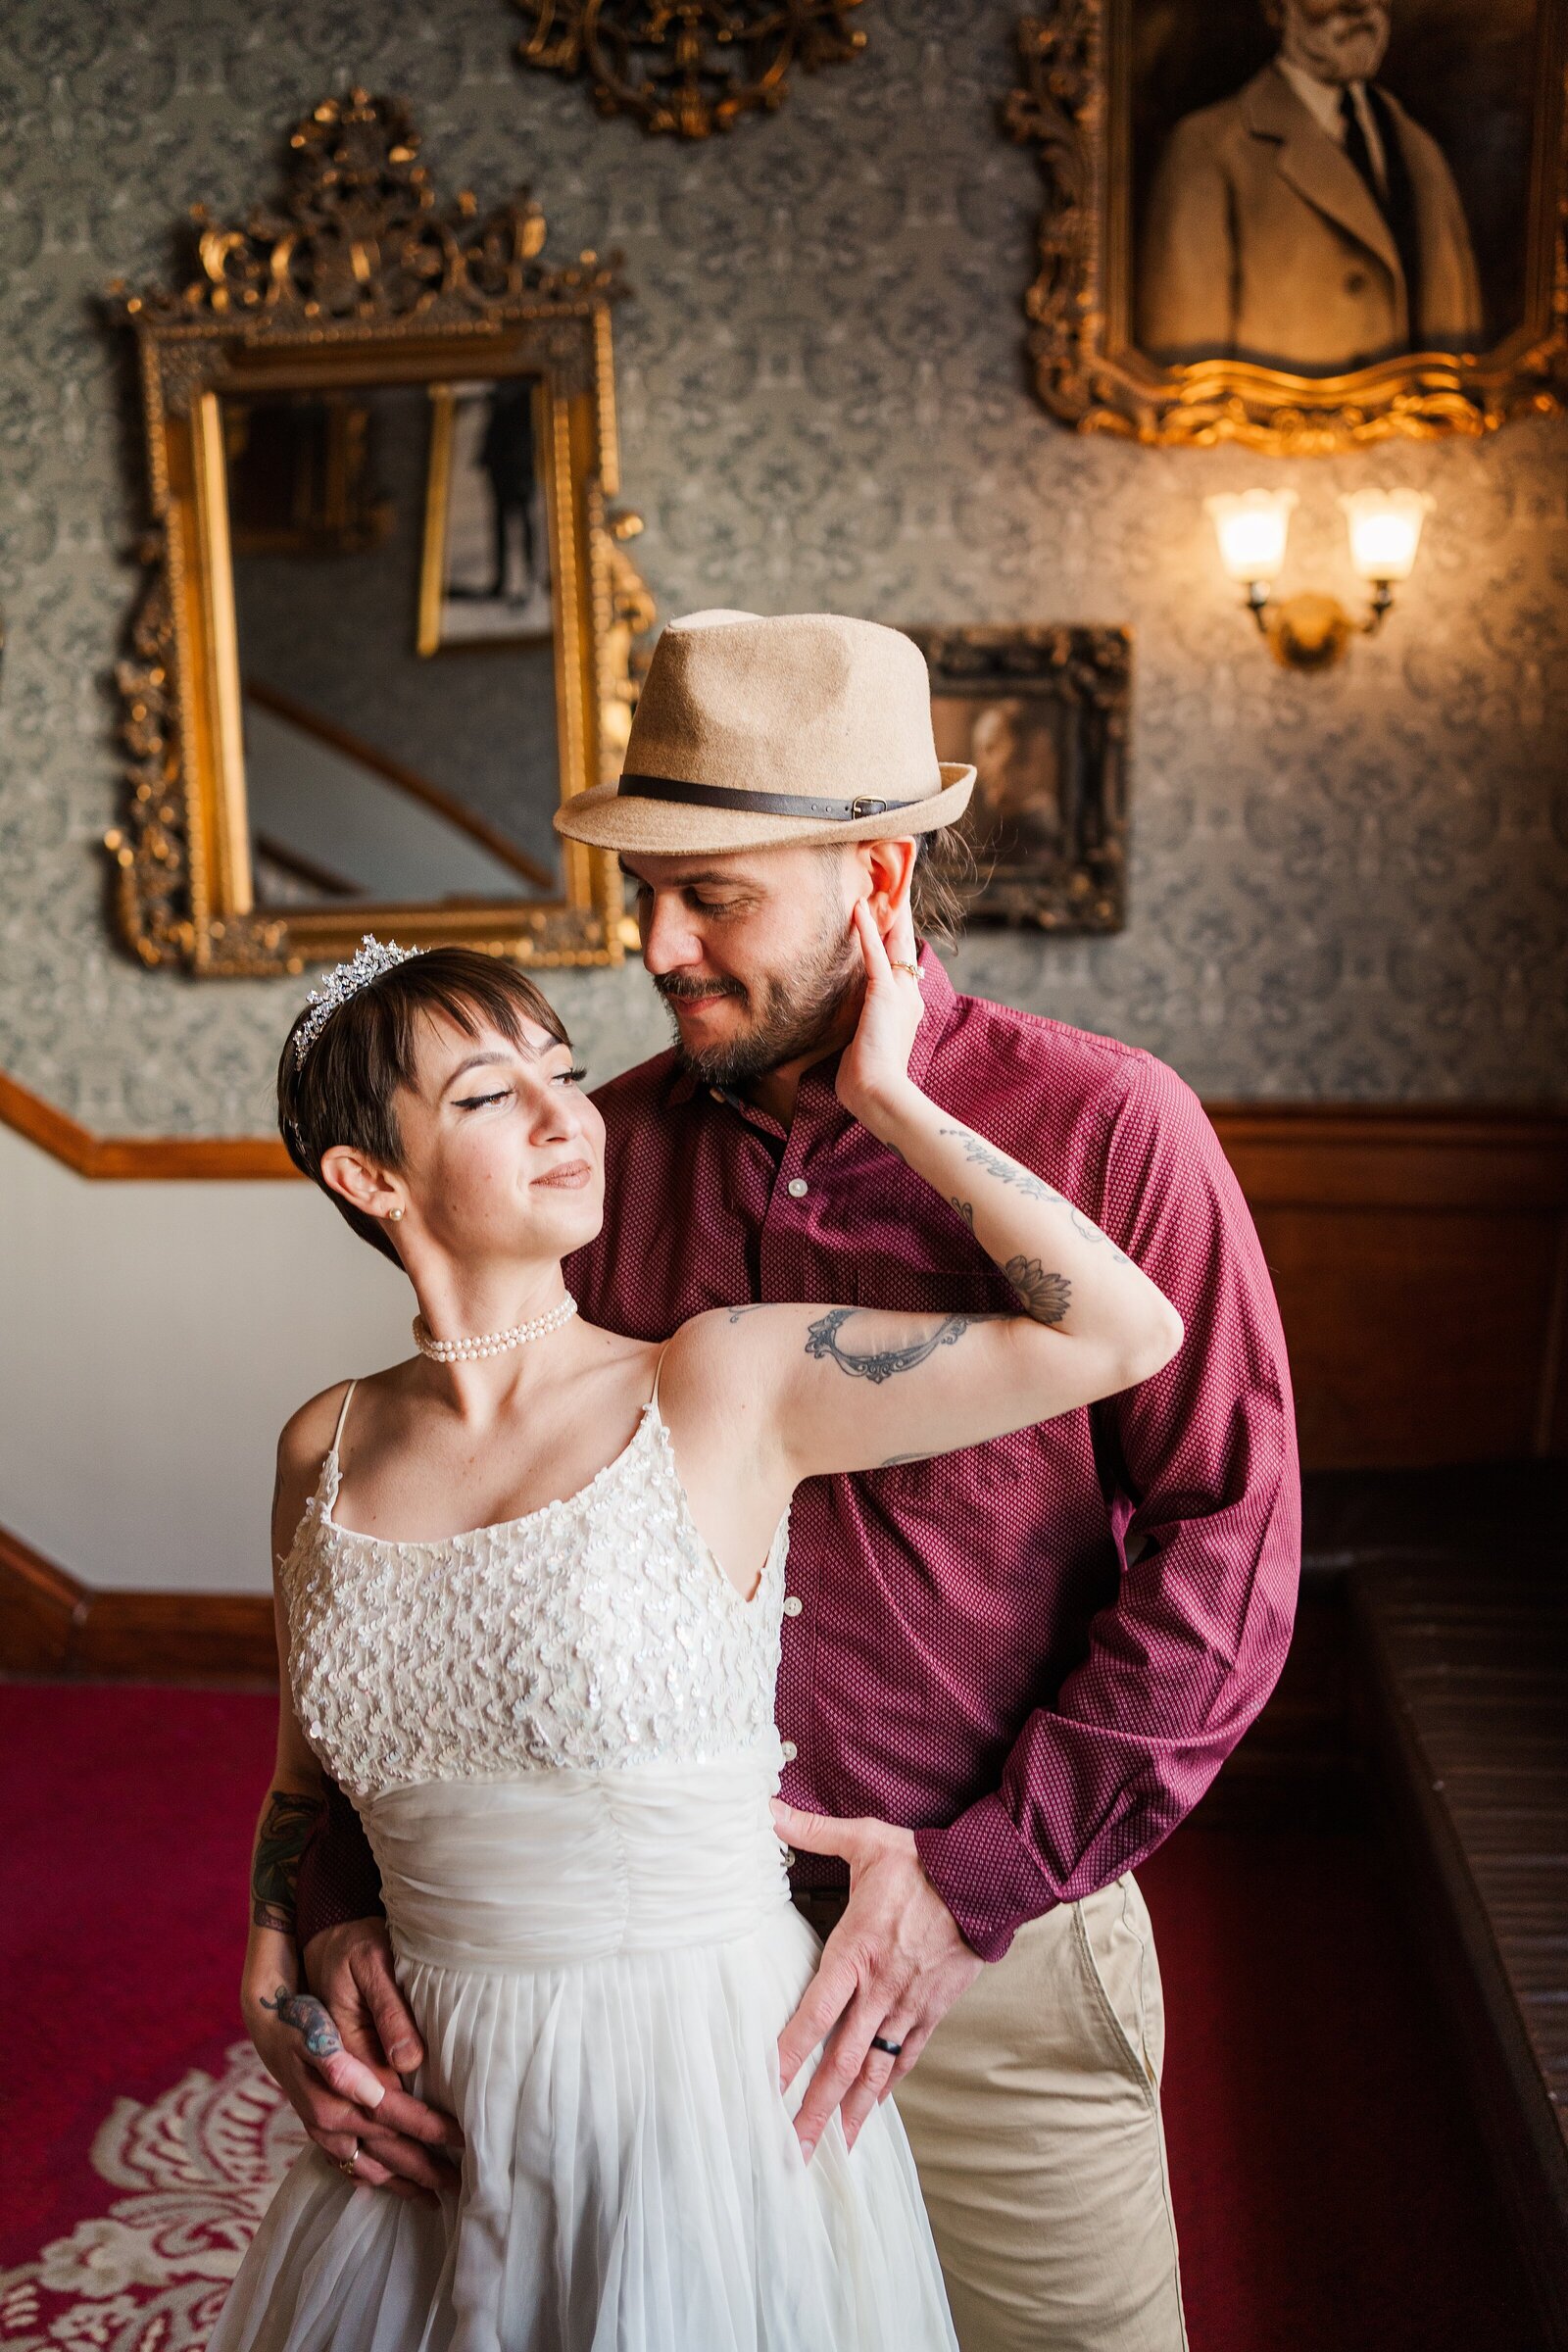 Celebrate your love story with Samantha Immer Photography's personalized and intimate approach to wedding photography in Colorado. Our authentic and meaningful photos will capture your special day.